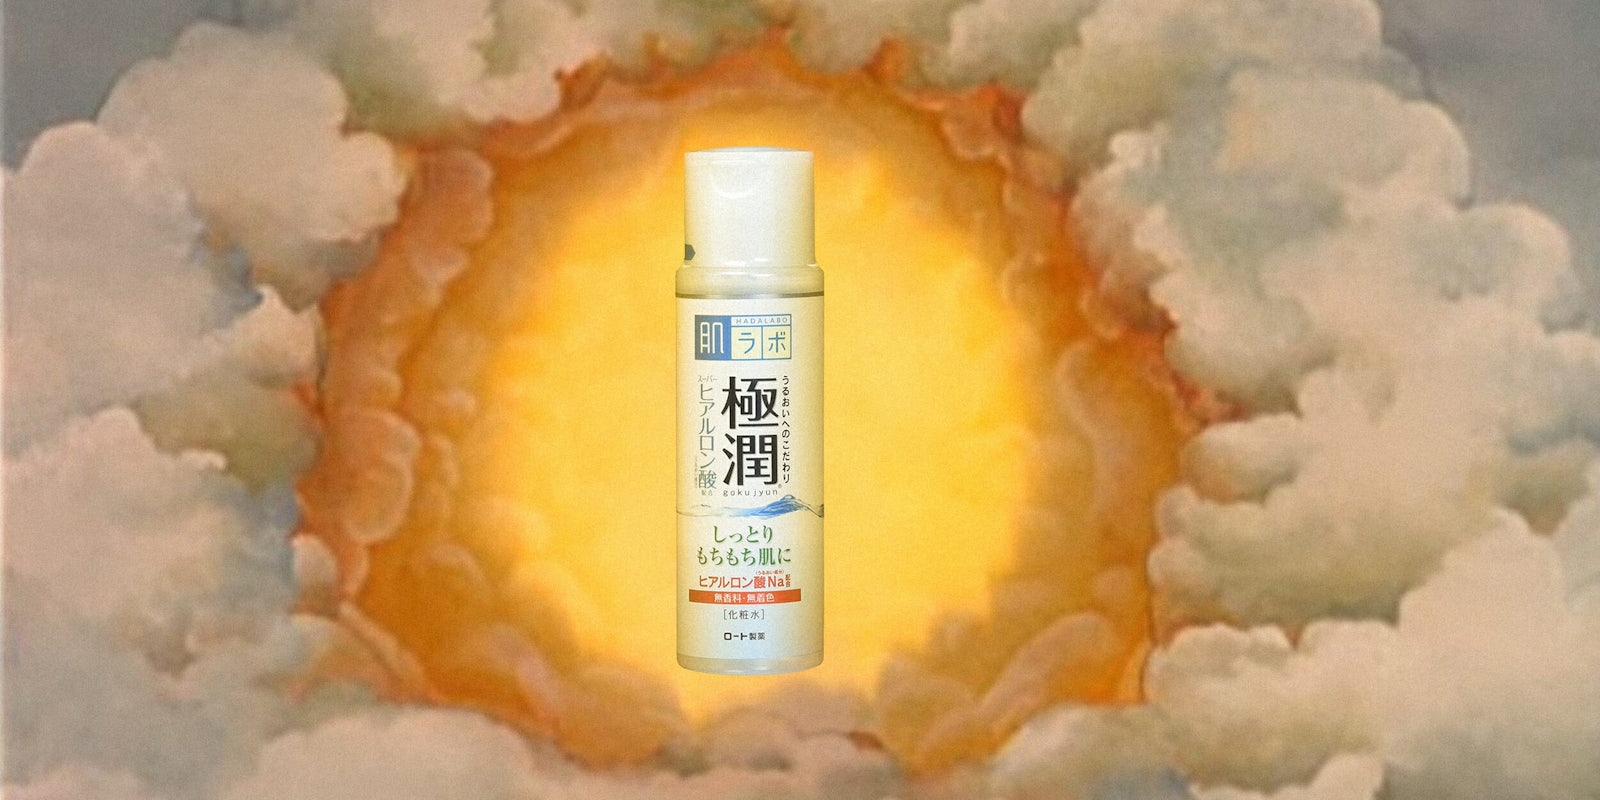 Hada Labo bottle as The Holy Grail